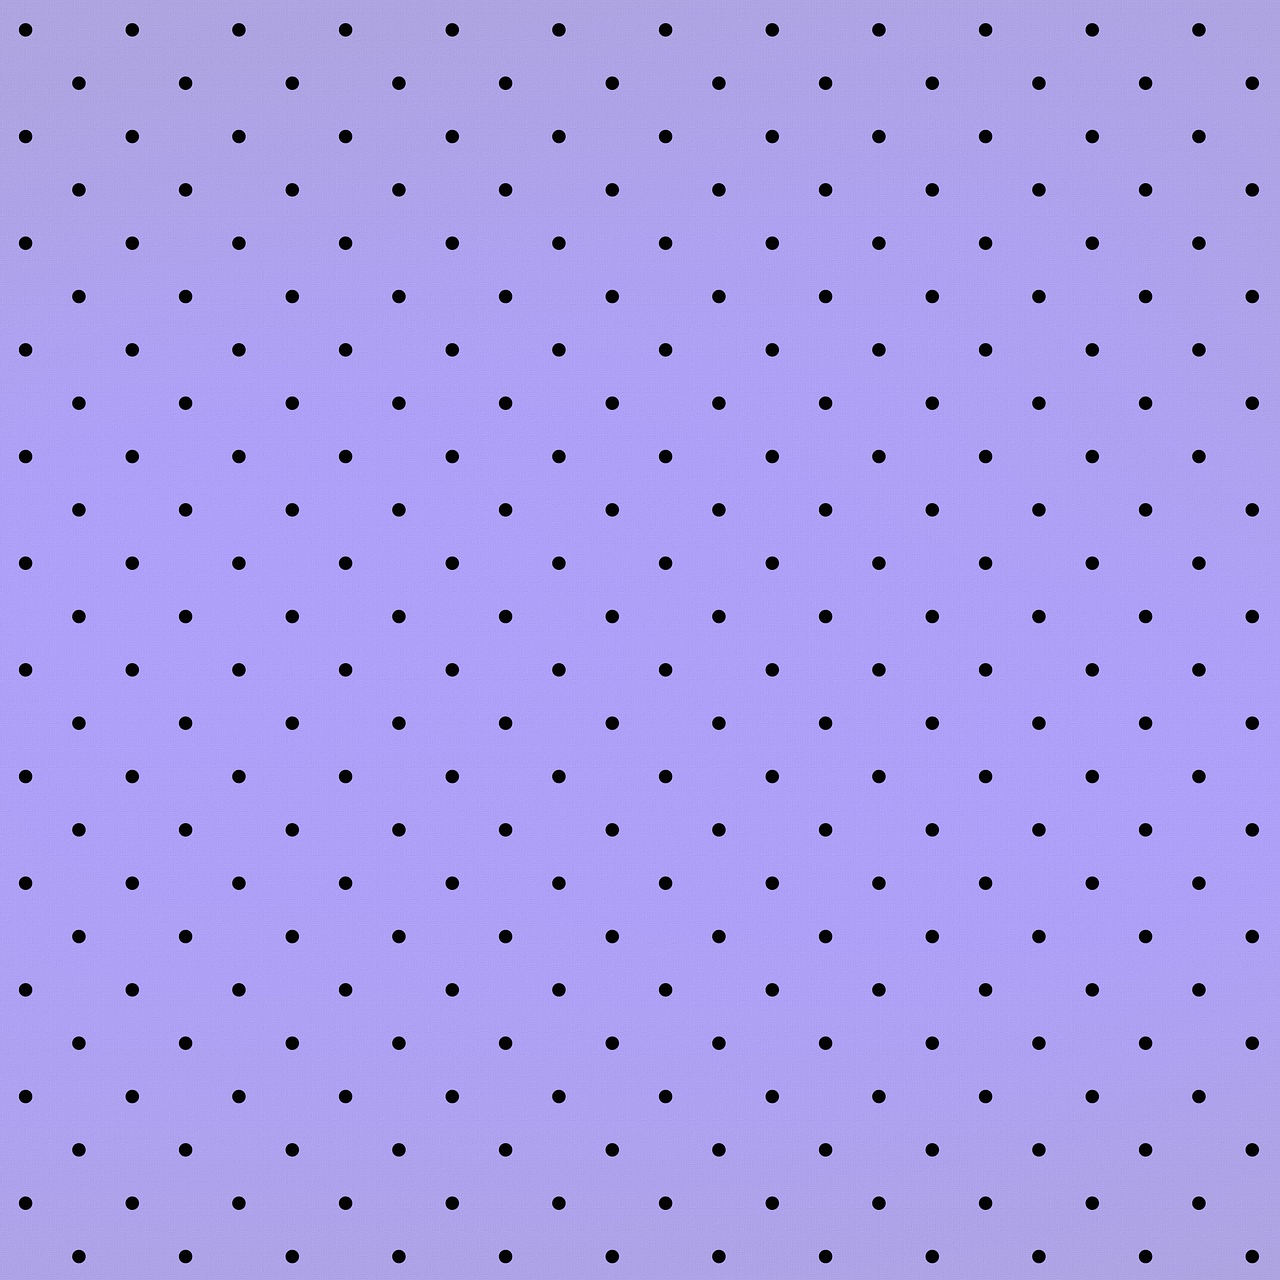 a pattern of black dots on a purple background, tumblr, wrapped blue background, view from far away, gray dull background, various posed